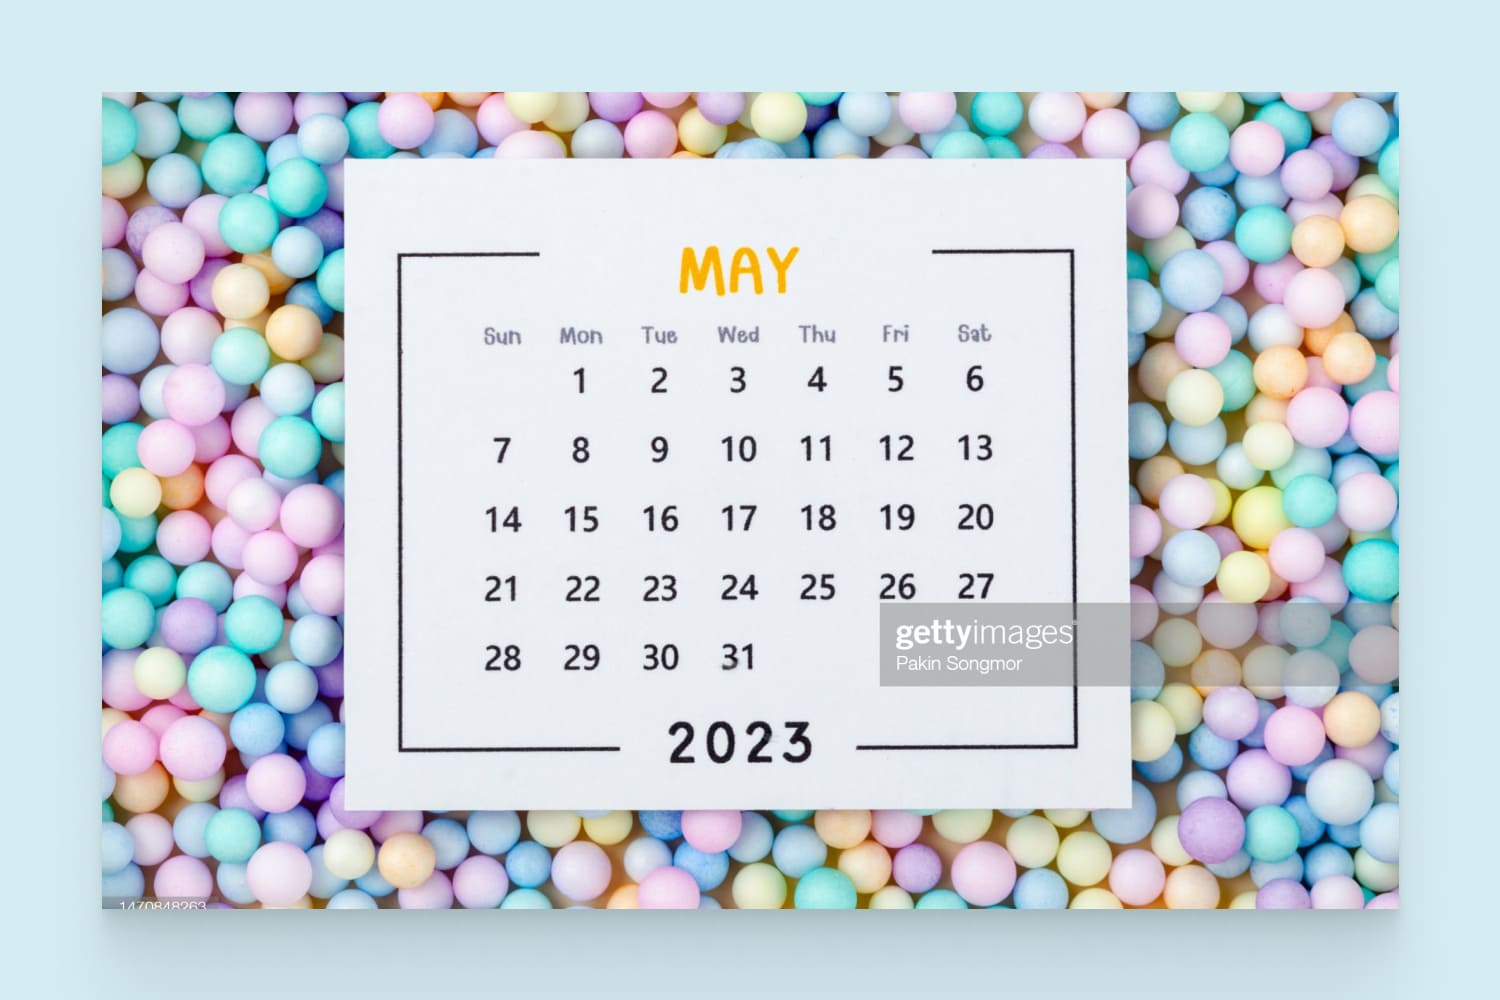 Calendar for May 2023 with a colorful plastic balls background